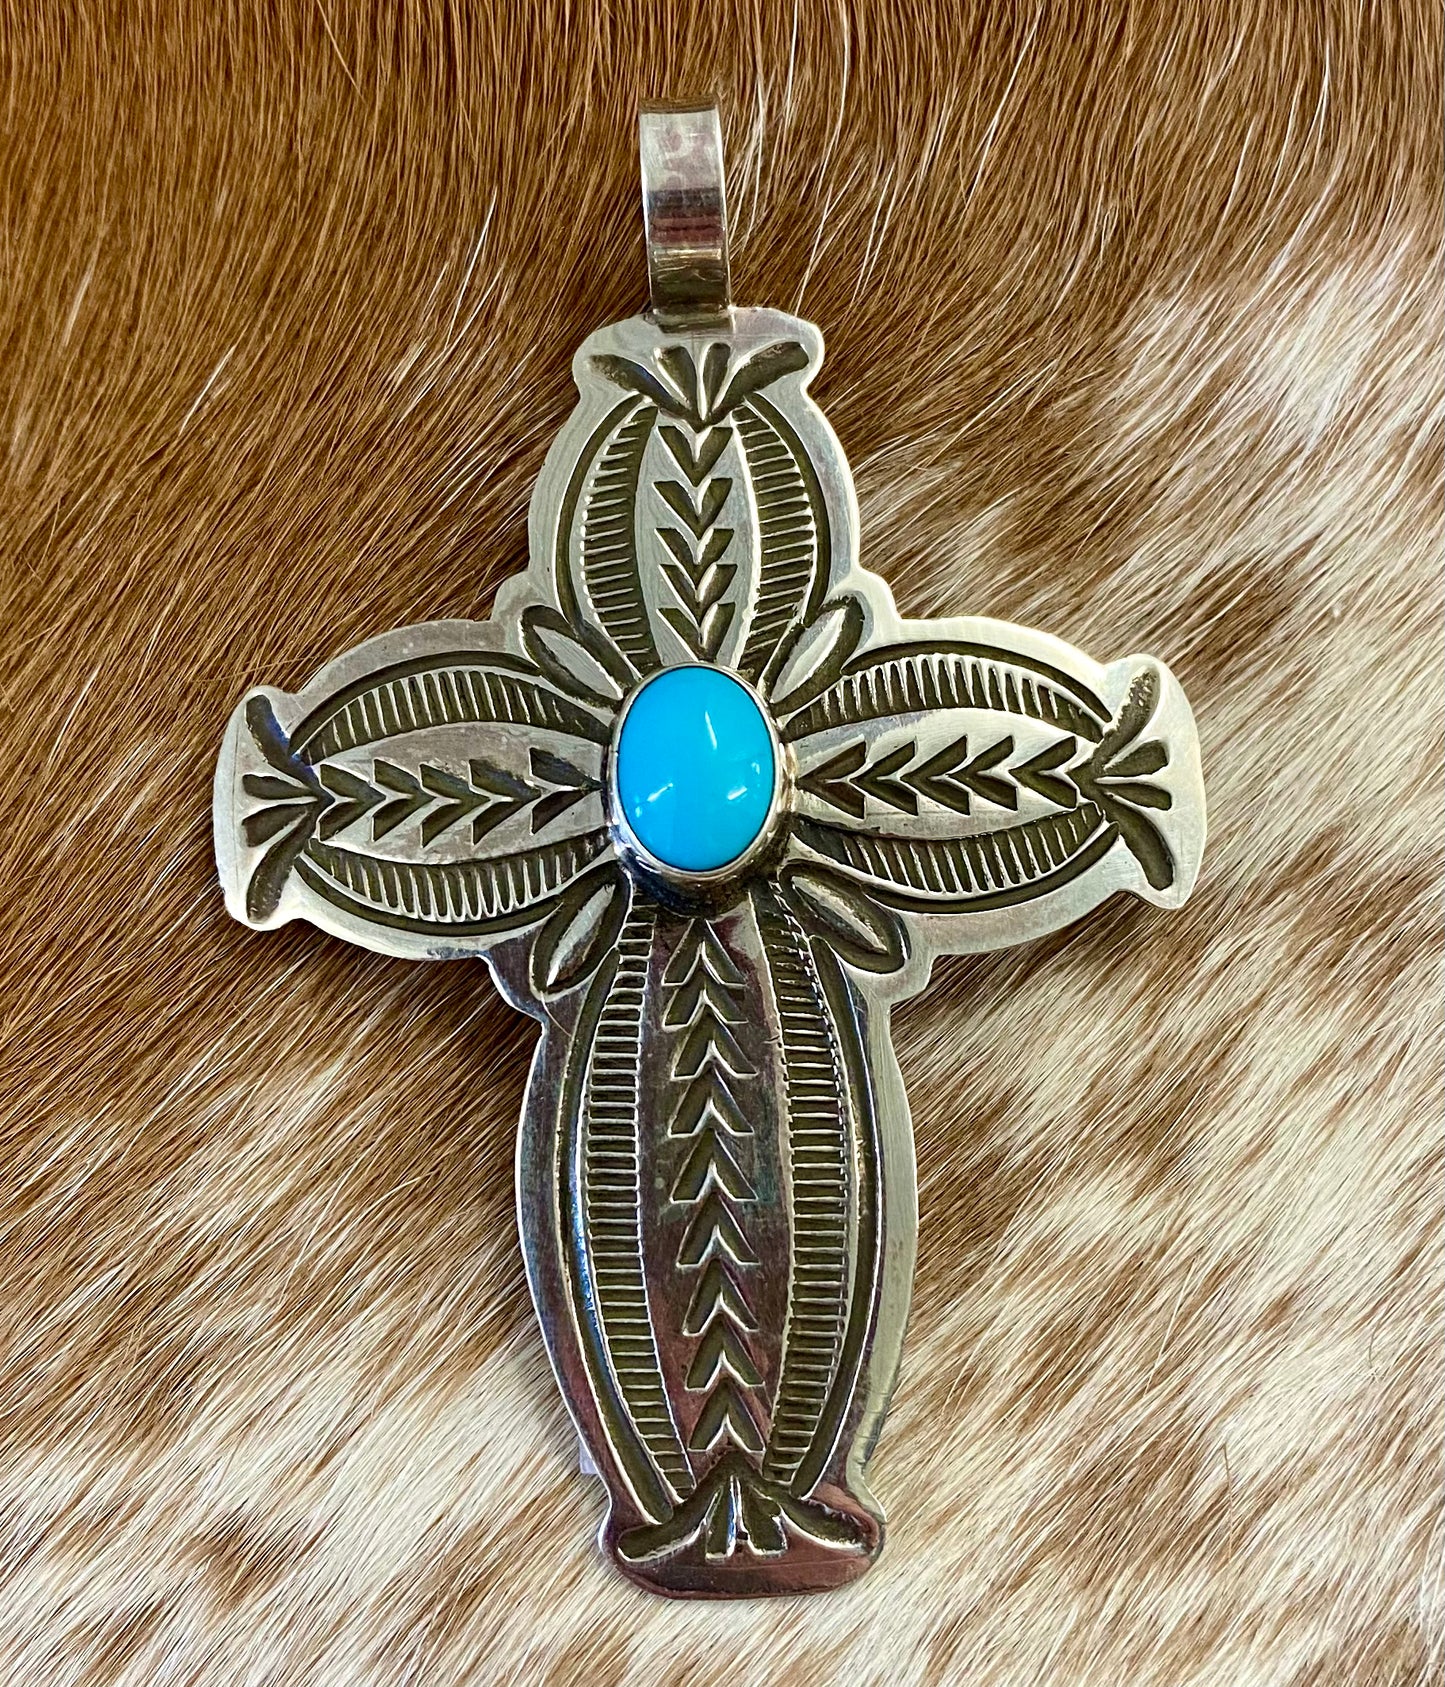 Beautiful sterling silver Native made turquoise cross pendant. Stamped sterling and signed BLKGT by Native American artist silversmith Arnold Blackgoat. The perfect cross to wear on any length chain necklace or a very small 3mm Navajo pearl necklace.   Size: 2” inches length x 1.5” inches width   Signed: YES "BLKGT"   Hallmark/Artist: Arnold Blackgoat   Stone: Turquoise    